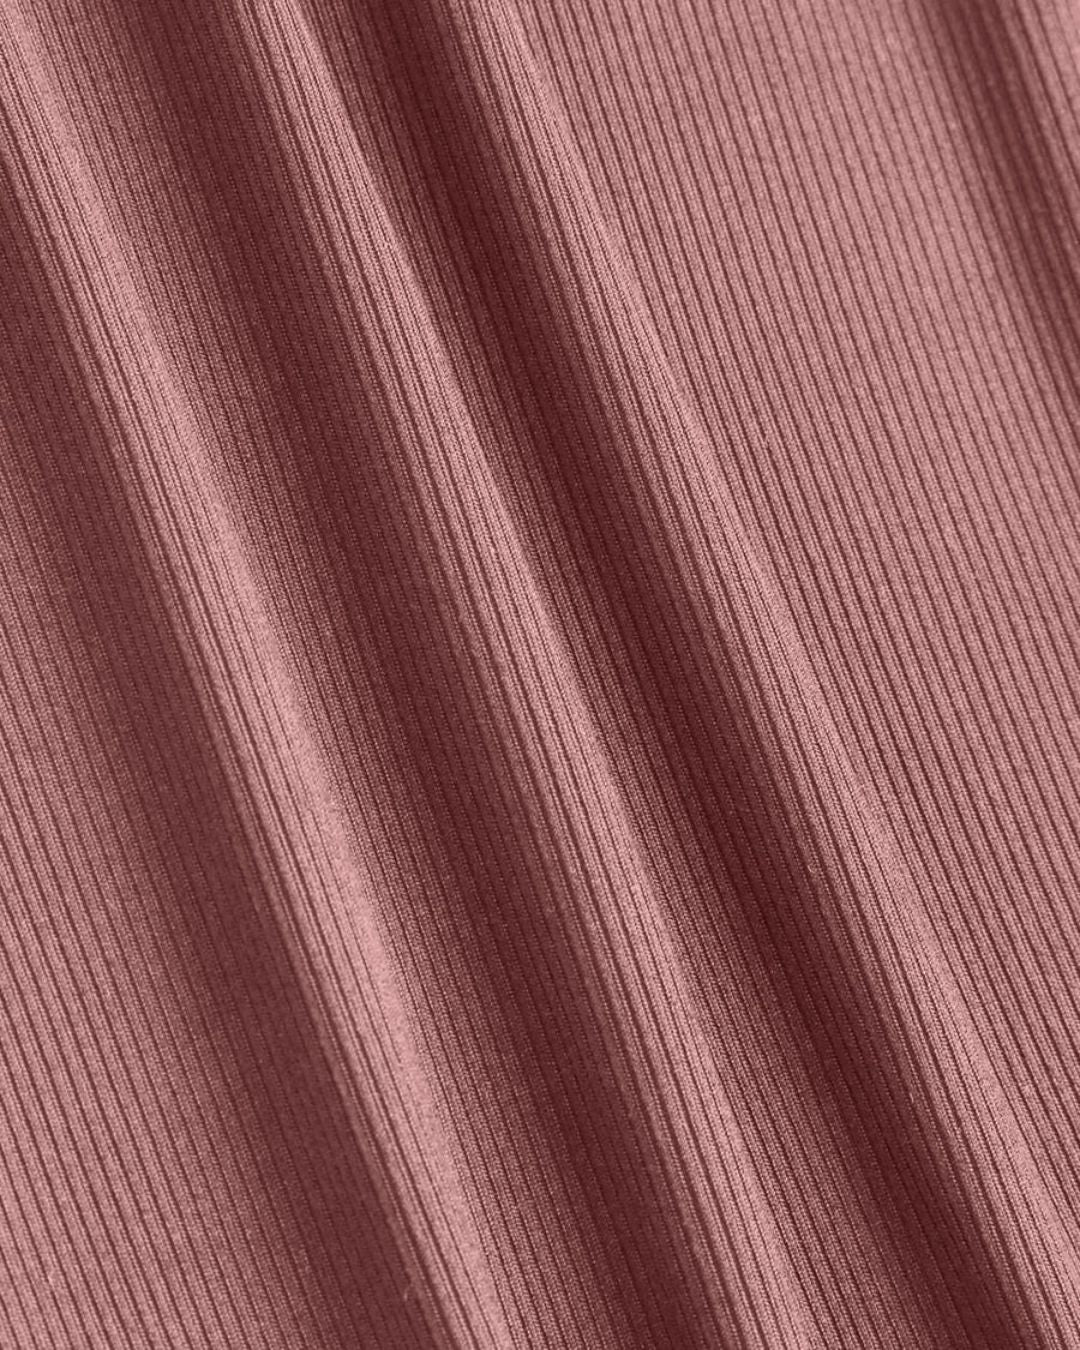 RUCHED A-LINE DRESS,a line, dresses, dusty pink, knitted, mini, regular fit, ribbed, ruched, shoulder strap, sleeveless, soft girl, solid, square neck, stretchable, vacation,ruched-a-line-dress-dustypink,Color- Dusty Pink
Fabric- Ribbed
Type- A-Line
Fit- Regular Fit
Length- Mini
Neck- Square Neck
Sleeve- Sleeveless
Straps- Shoulder Strap
Print- Solid
Details- Ruched